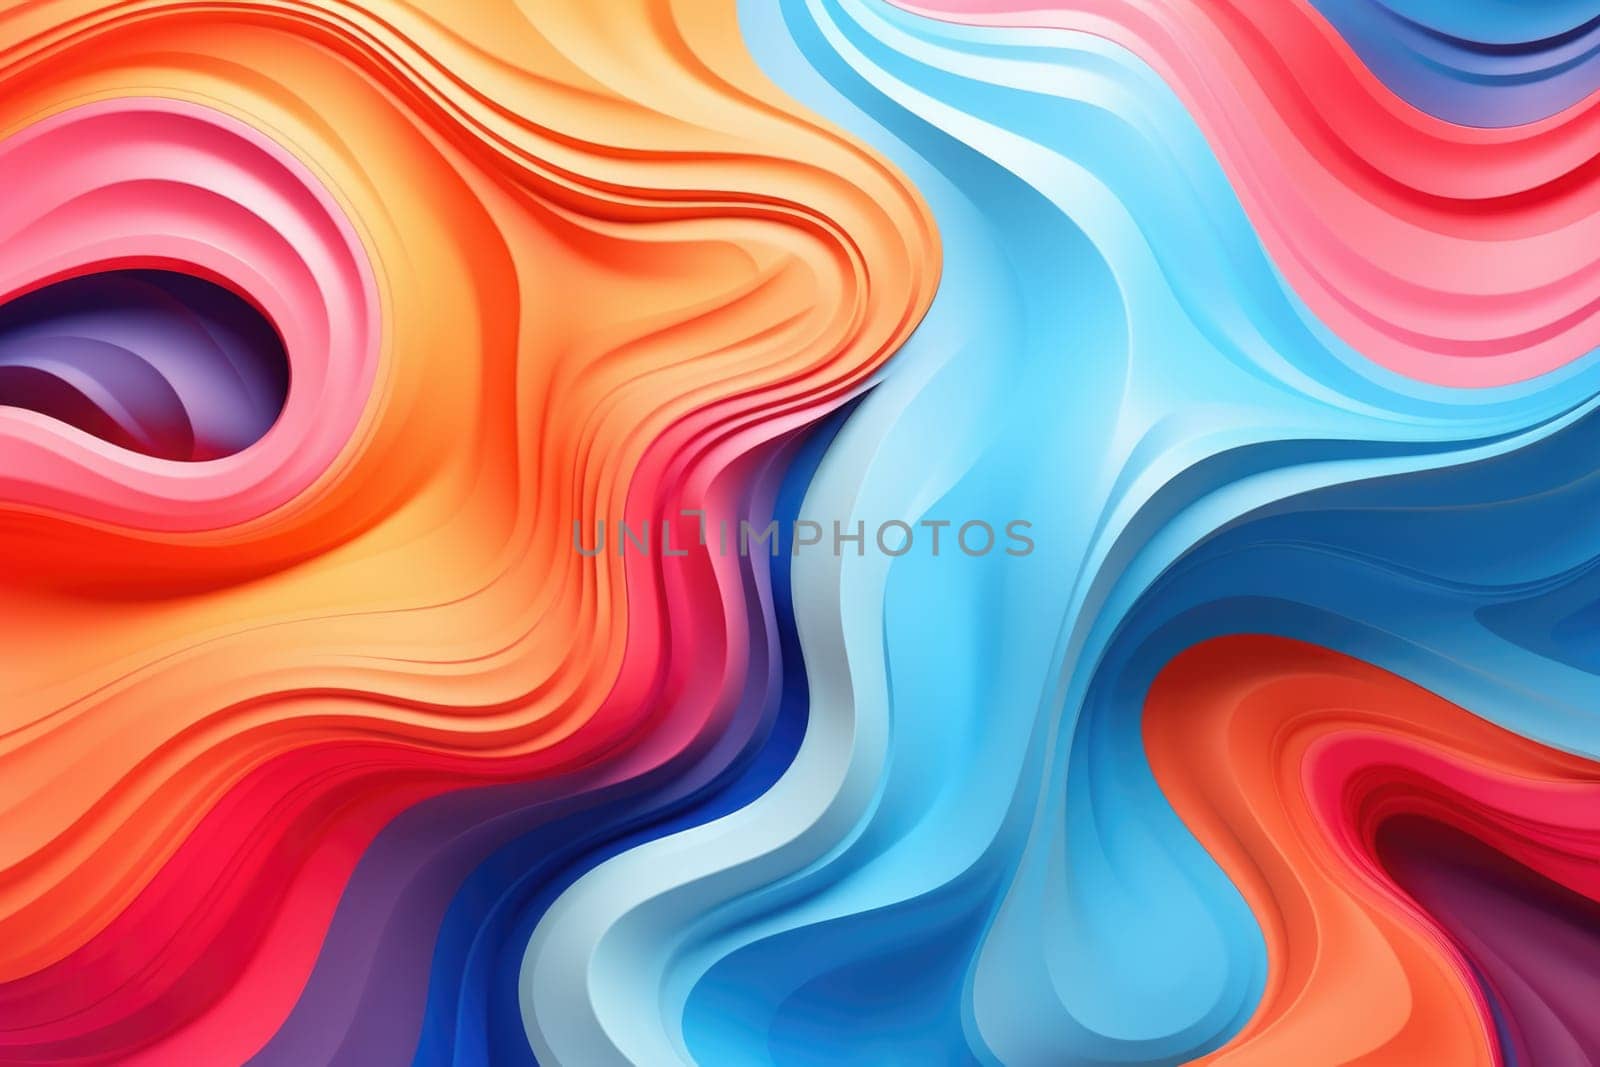 Multilayer colored texture gradient banner. Texture of colorful wavy layers.